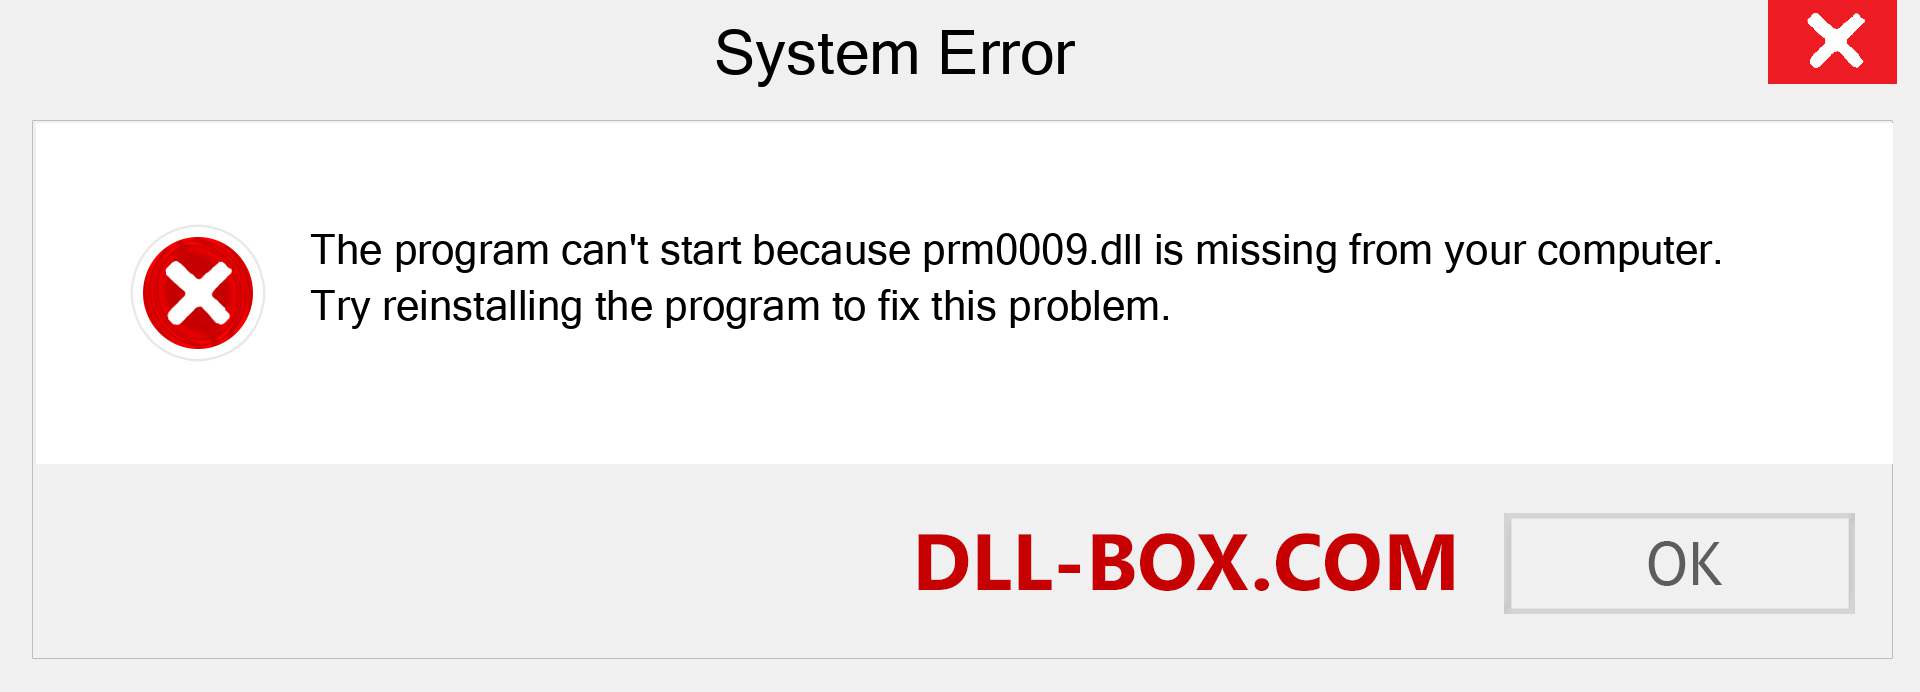  prm0009.dll file is missing?. Download for Windows 7, 8, 10 - Fix  prm0009 dll Missing Error on Windows, photos, images